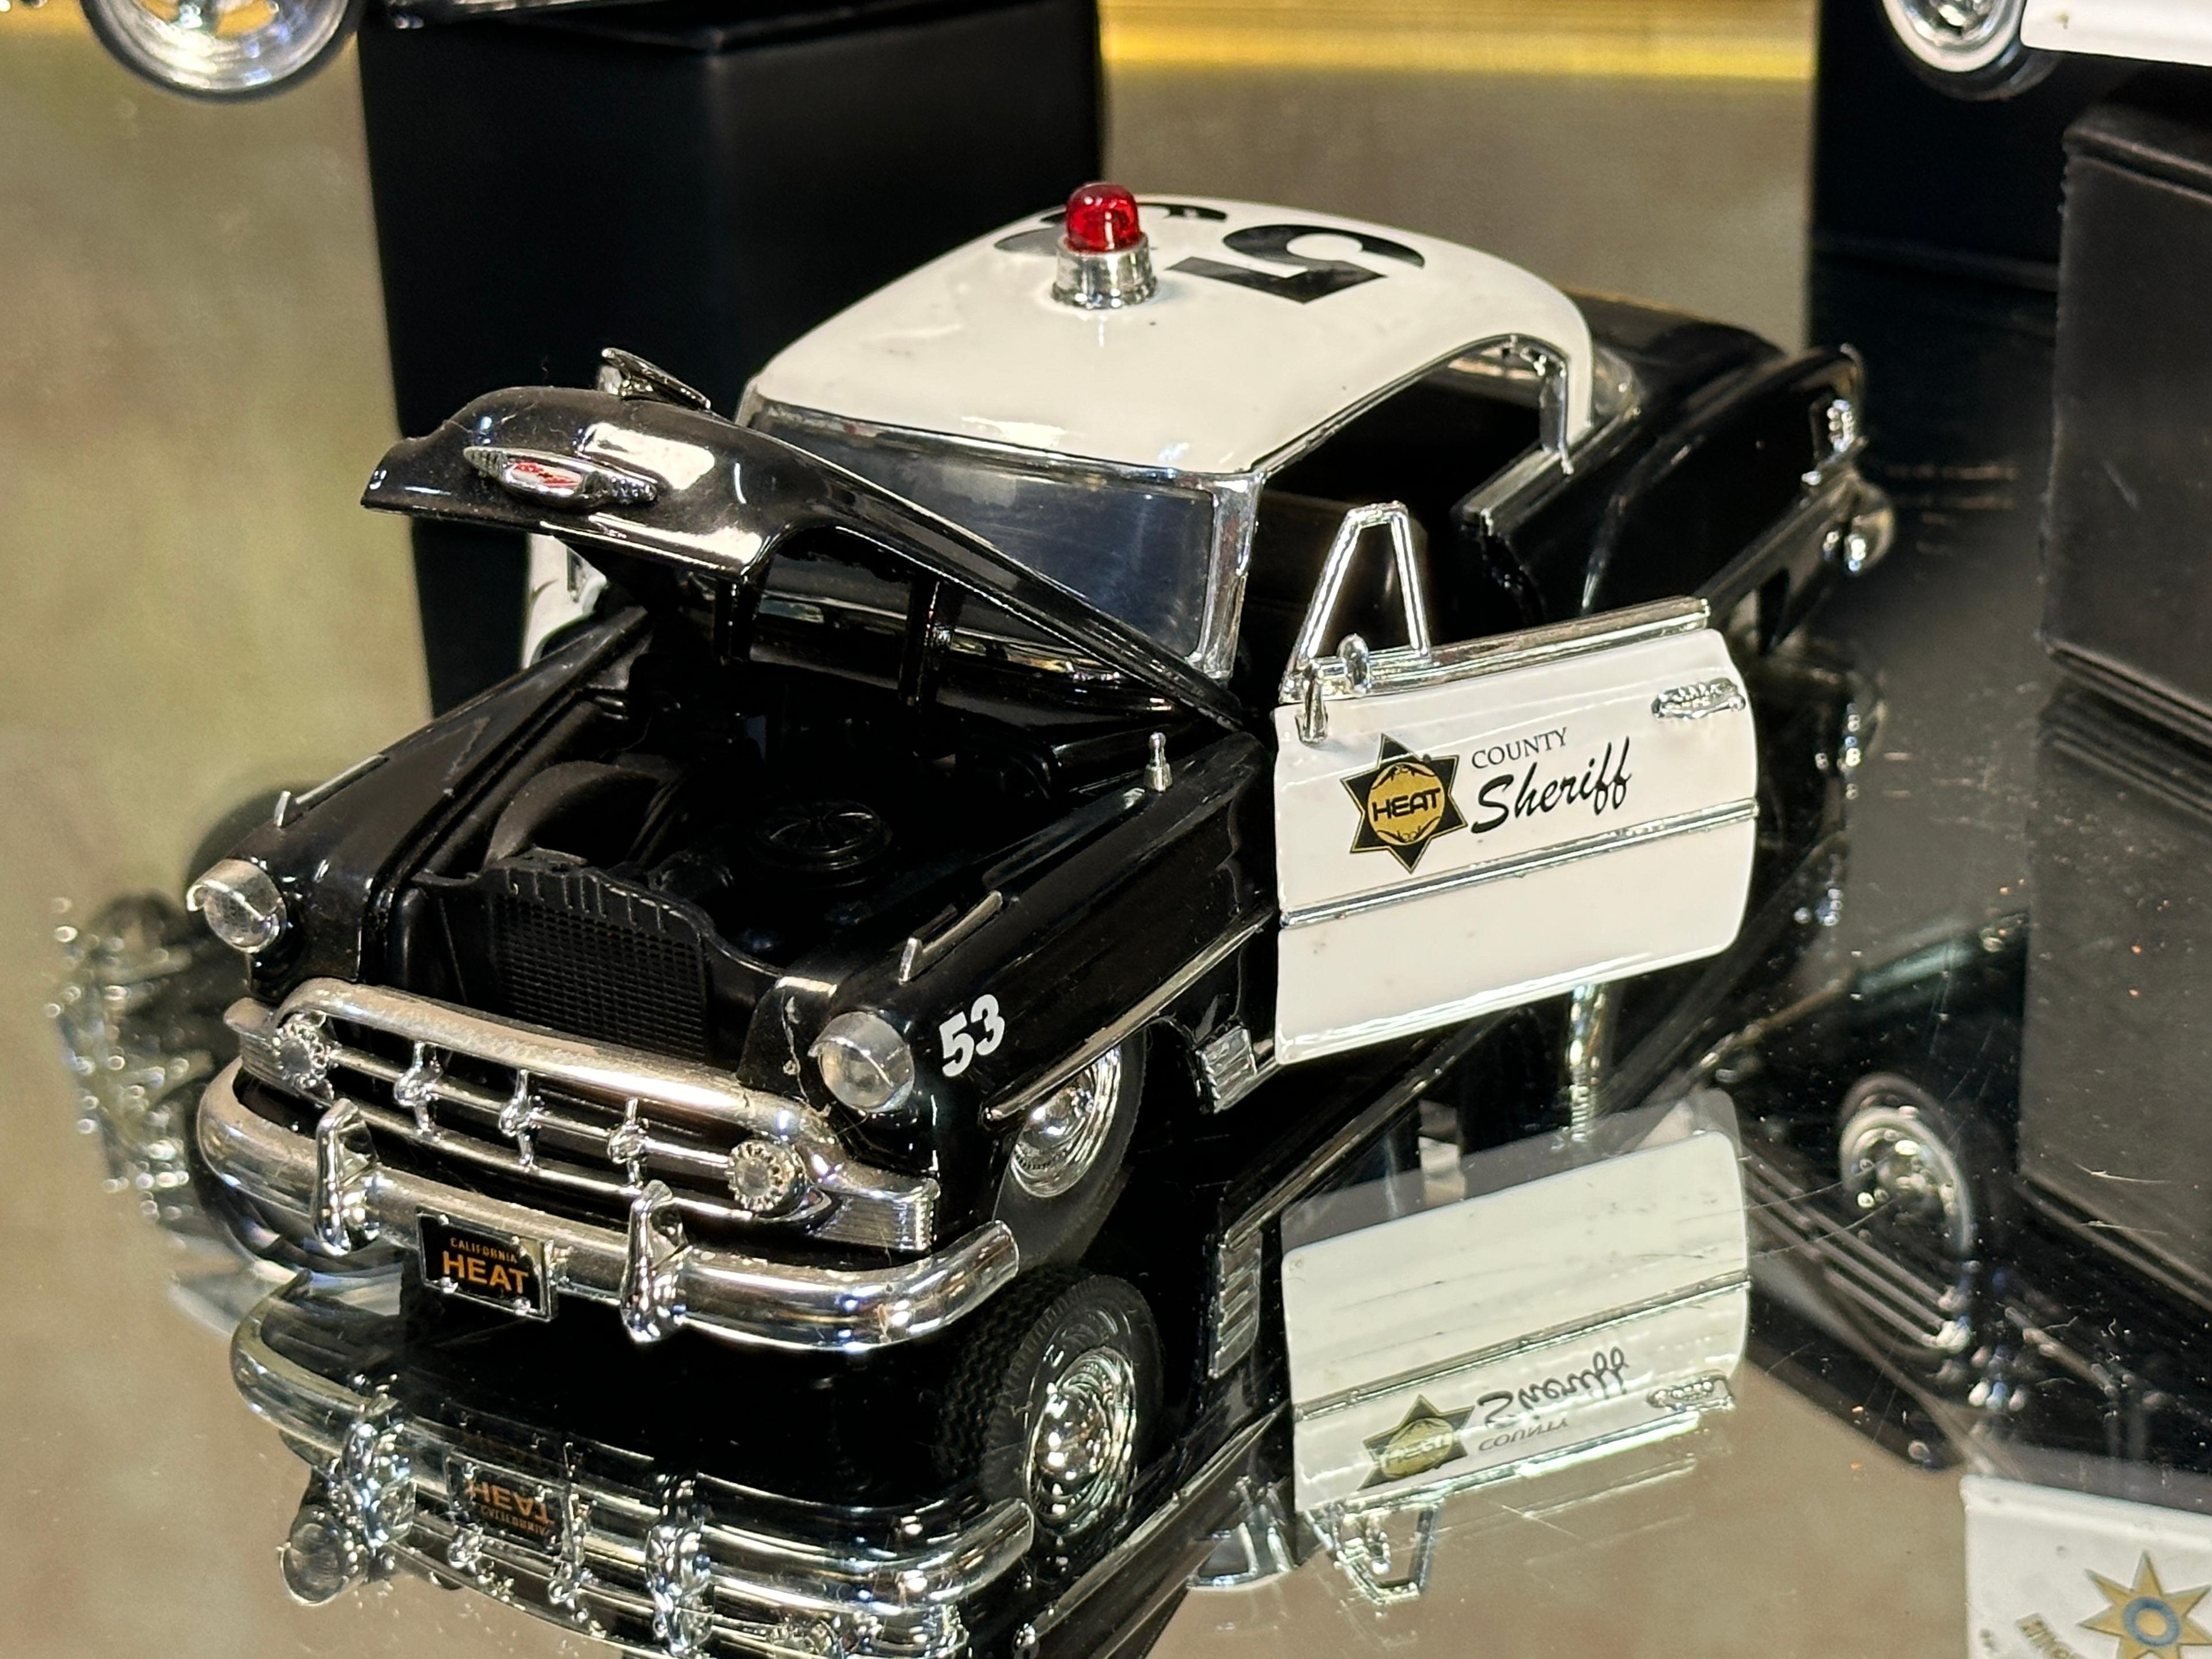 Diecast Police/Patrol Vehicle Collection